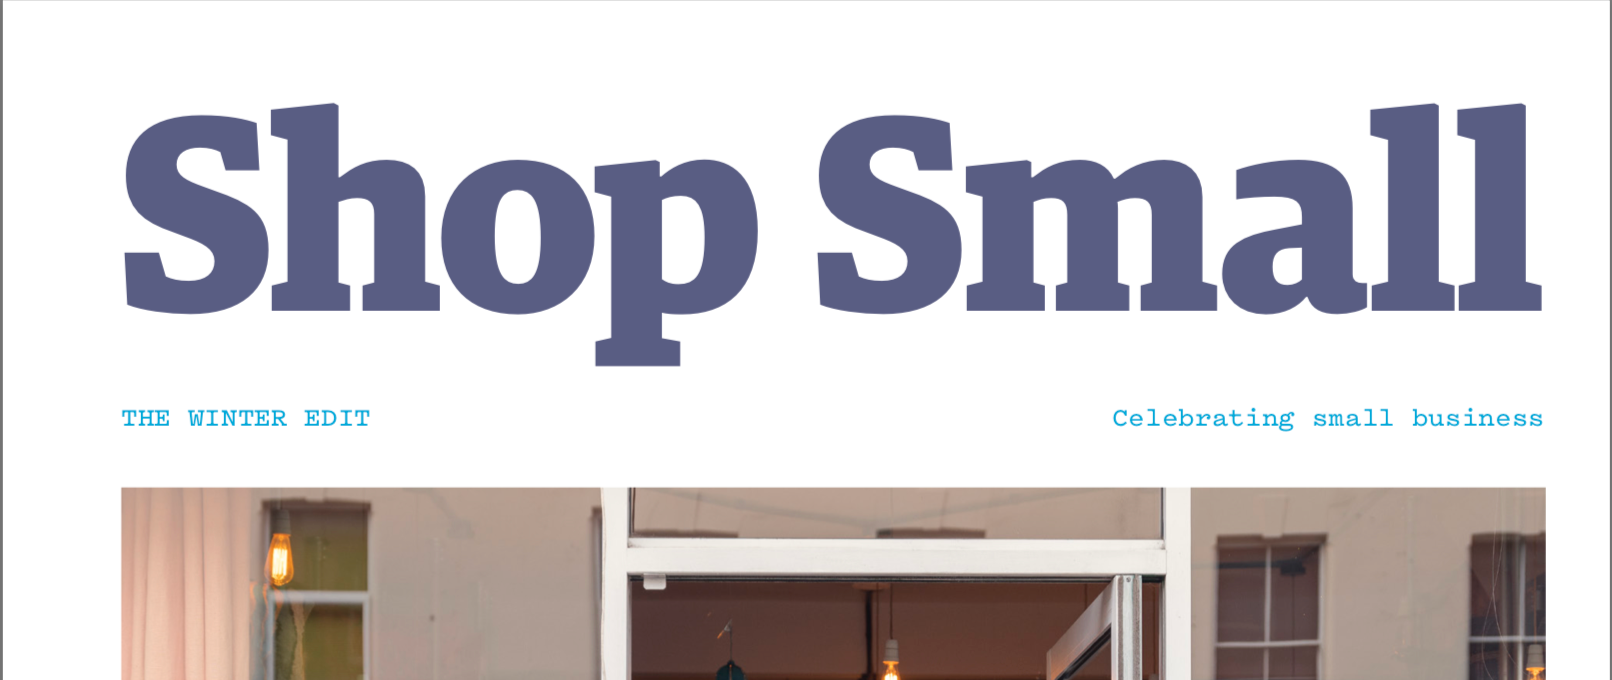 KIN featured in Shop Small, by American Express